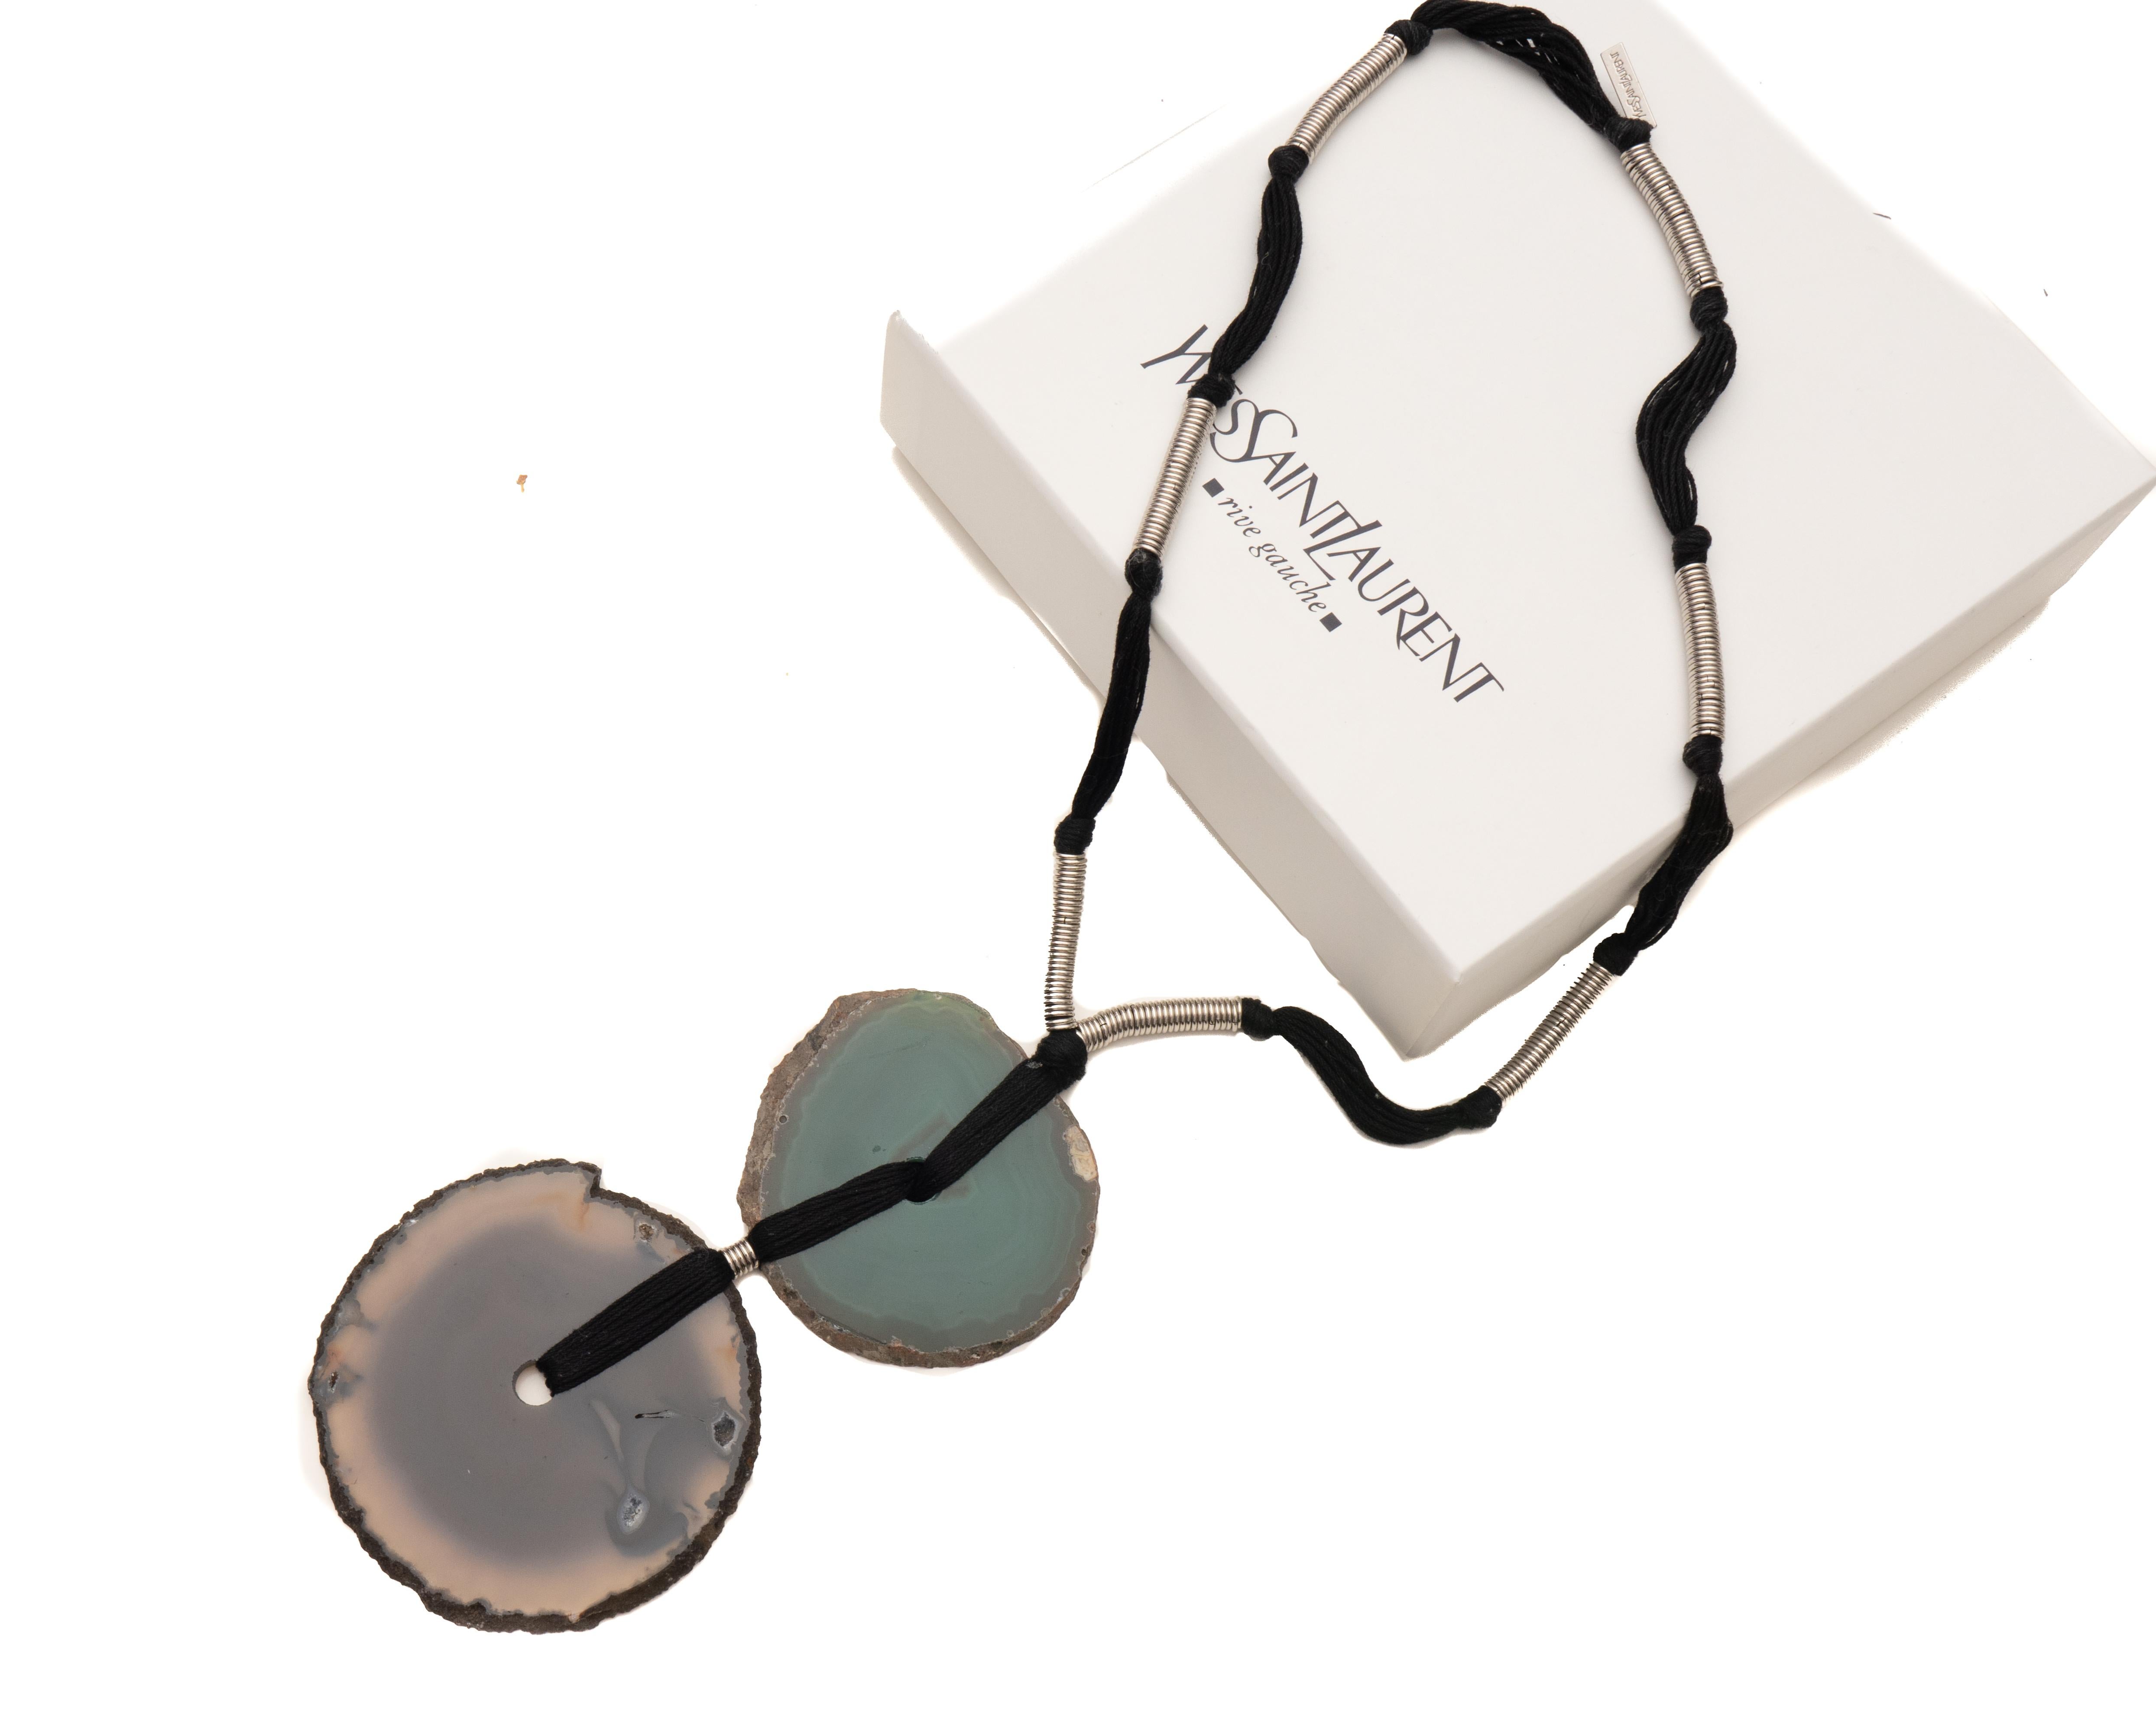 Necklace Details:
Yves Saint Laurent (YSL), Iconic Designer
Circa 1990s, Couture Line
Features Brown and Green Agate 
24 Inches in length 
Black and Steel Necklace 
Comes with Original Box 

